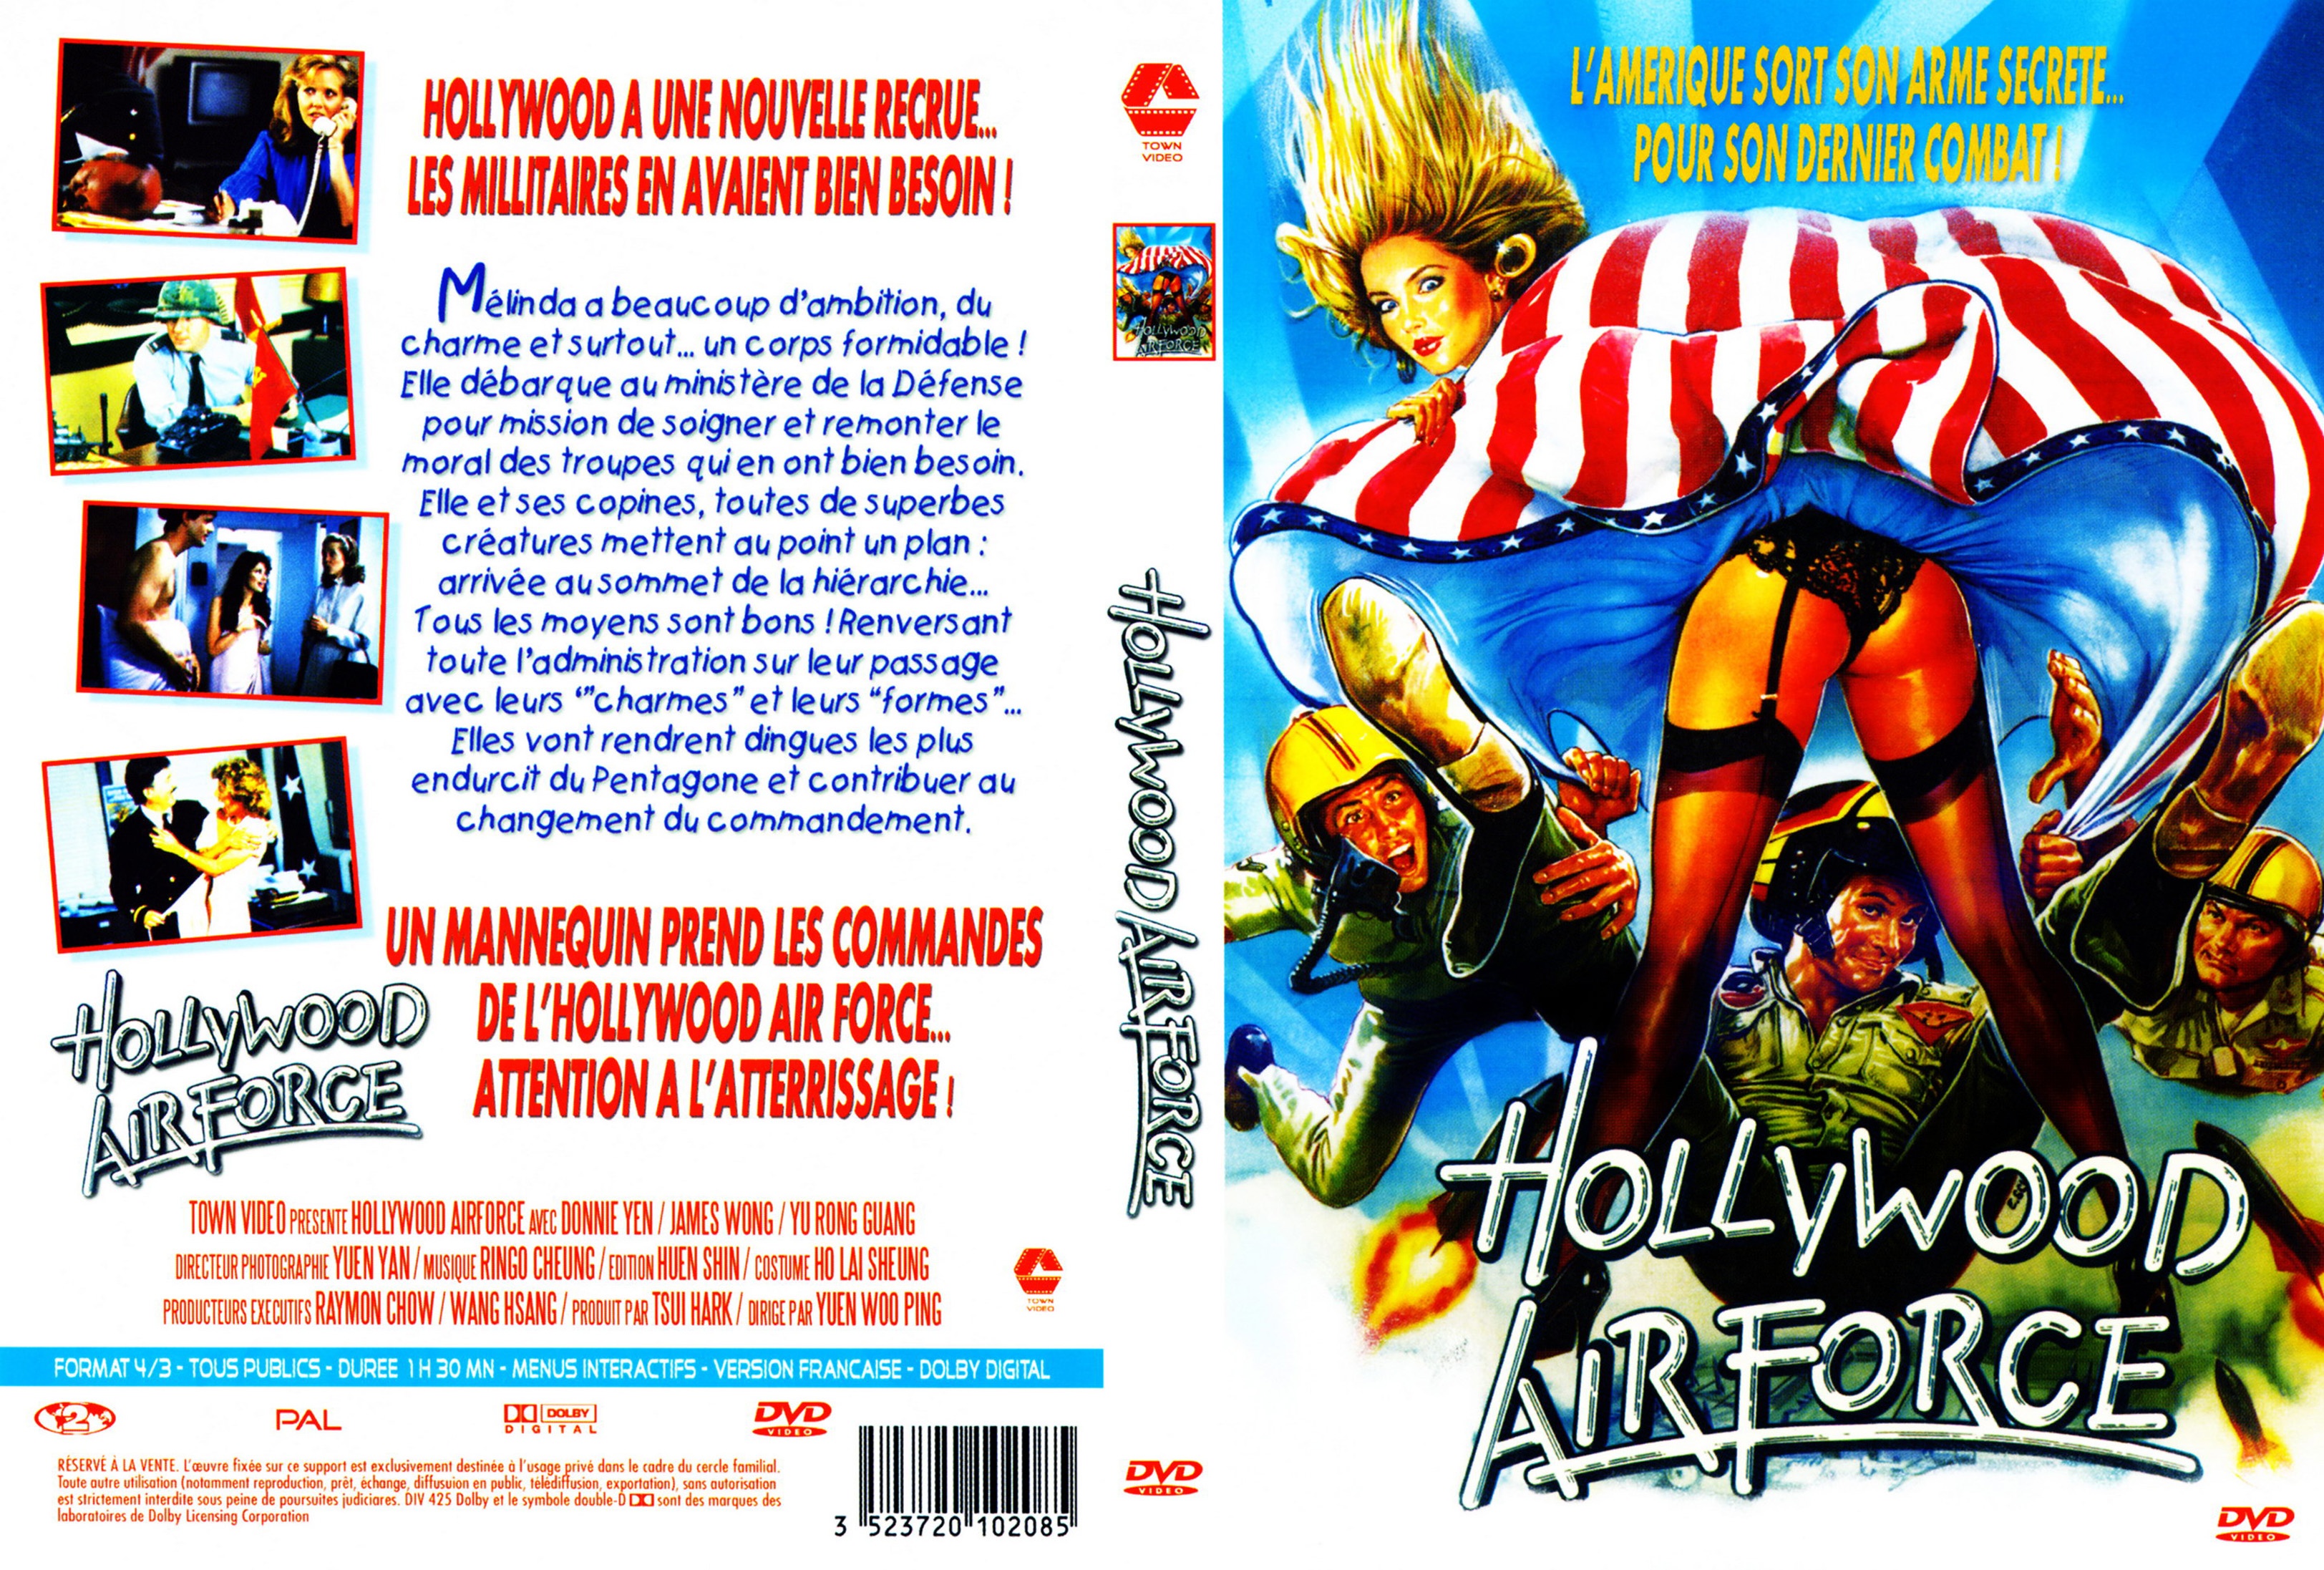 Jaquette DVD Hollywood airforce